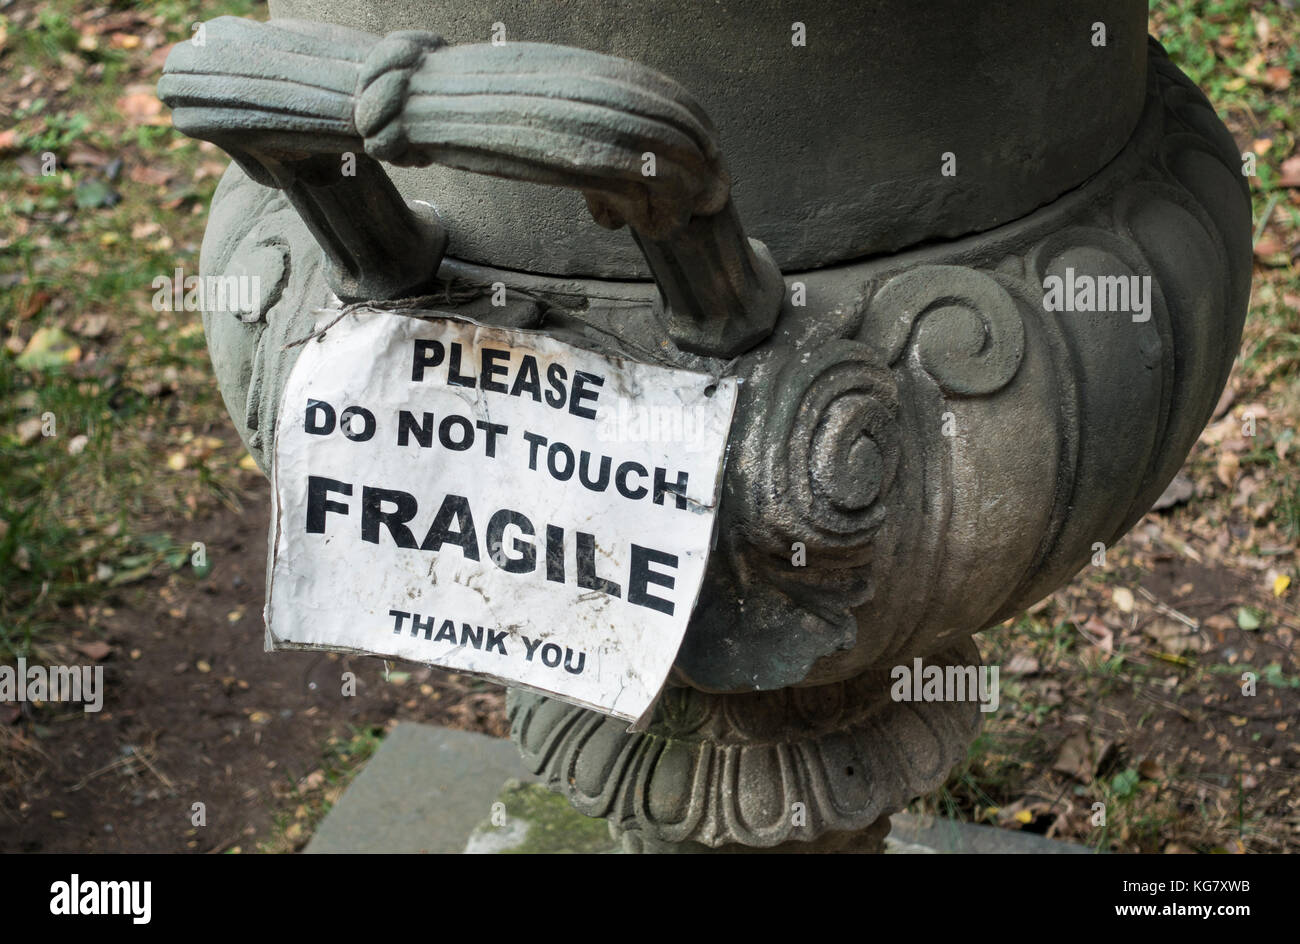 Warning sign on a large antique bowl in Elizabeth Street Park in Nolita in New York City Stock Photo